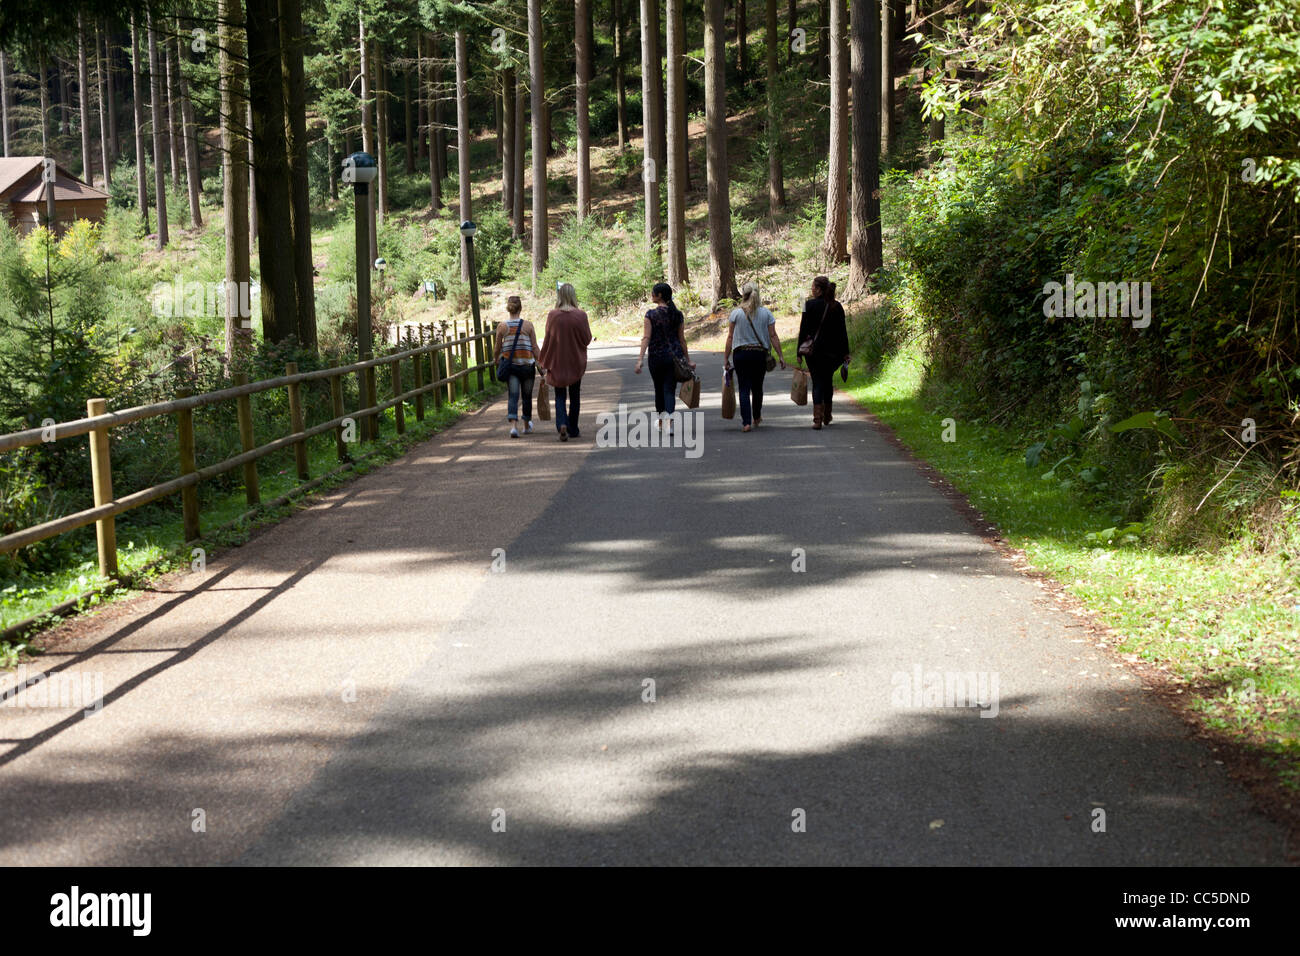 A family walking through the Center Parcs resort in Longleat forest, Wiltshire, England Stock Photo